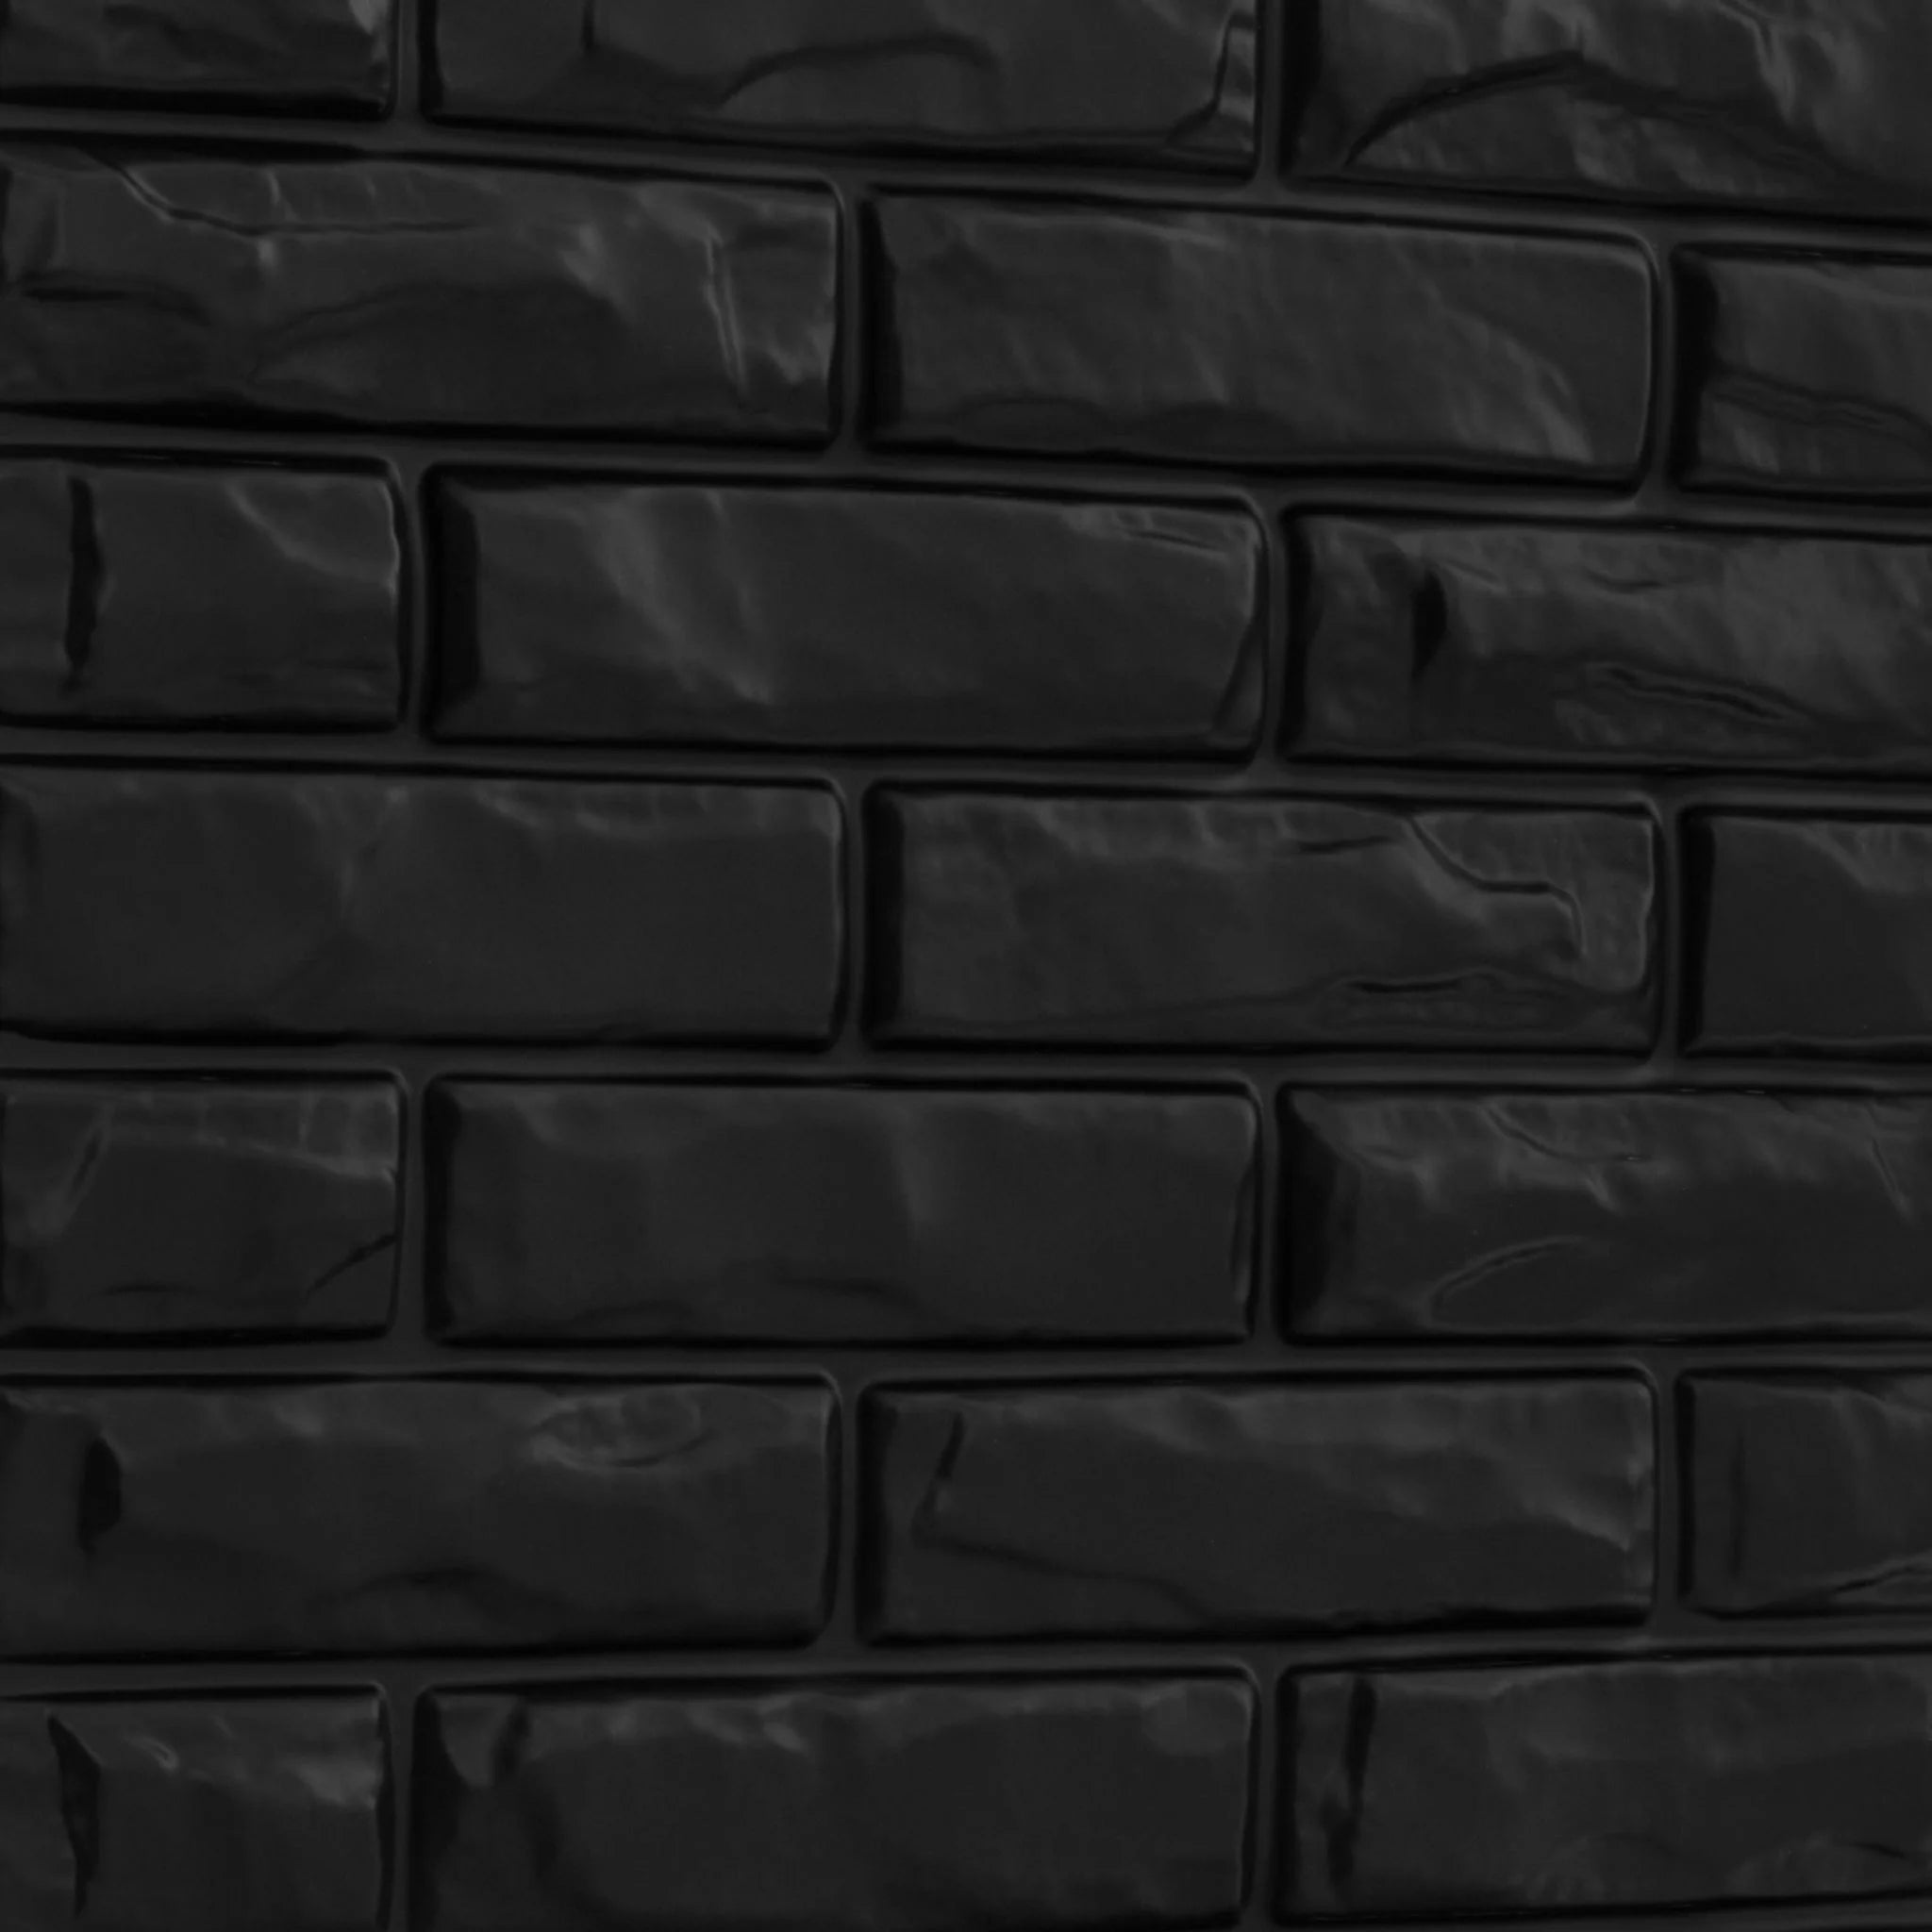 Close-up of black PVC wall panel with brick designs